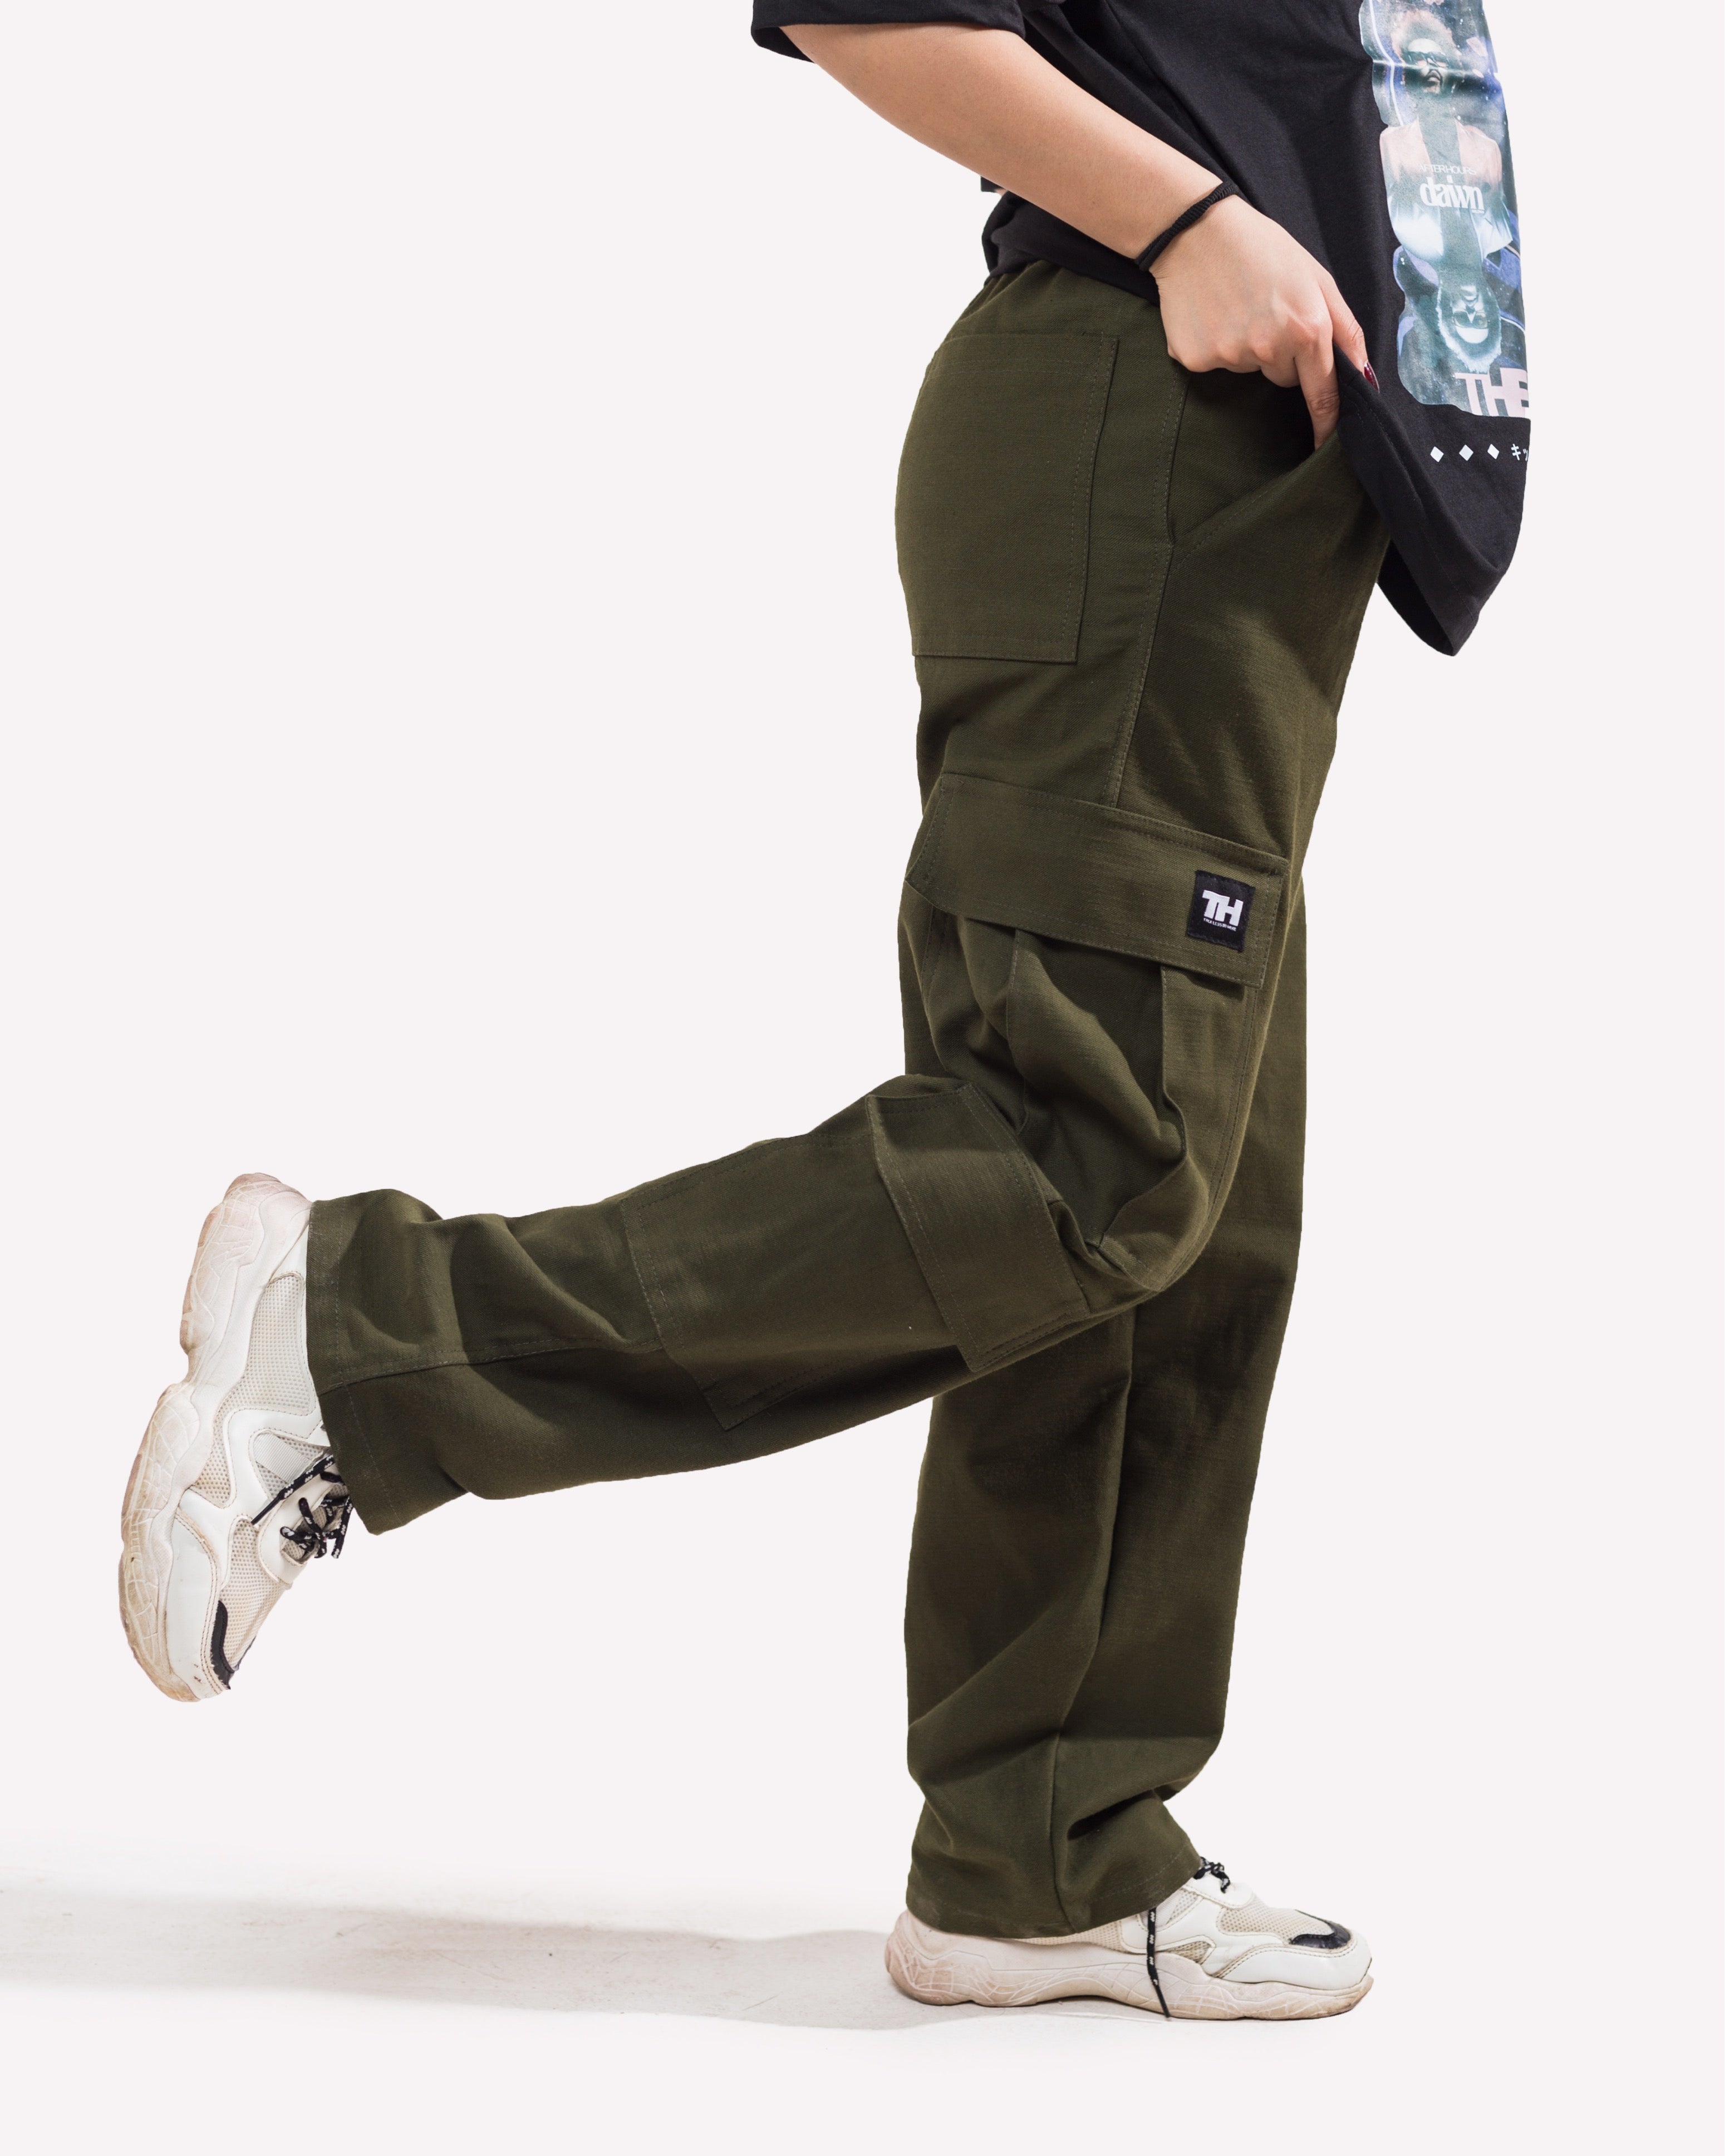 Buy West line men light olive twill cargo trouser Online in Pakistan On   at Lowest Prices